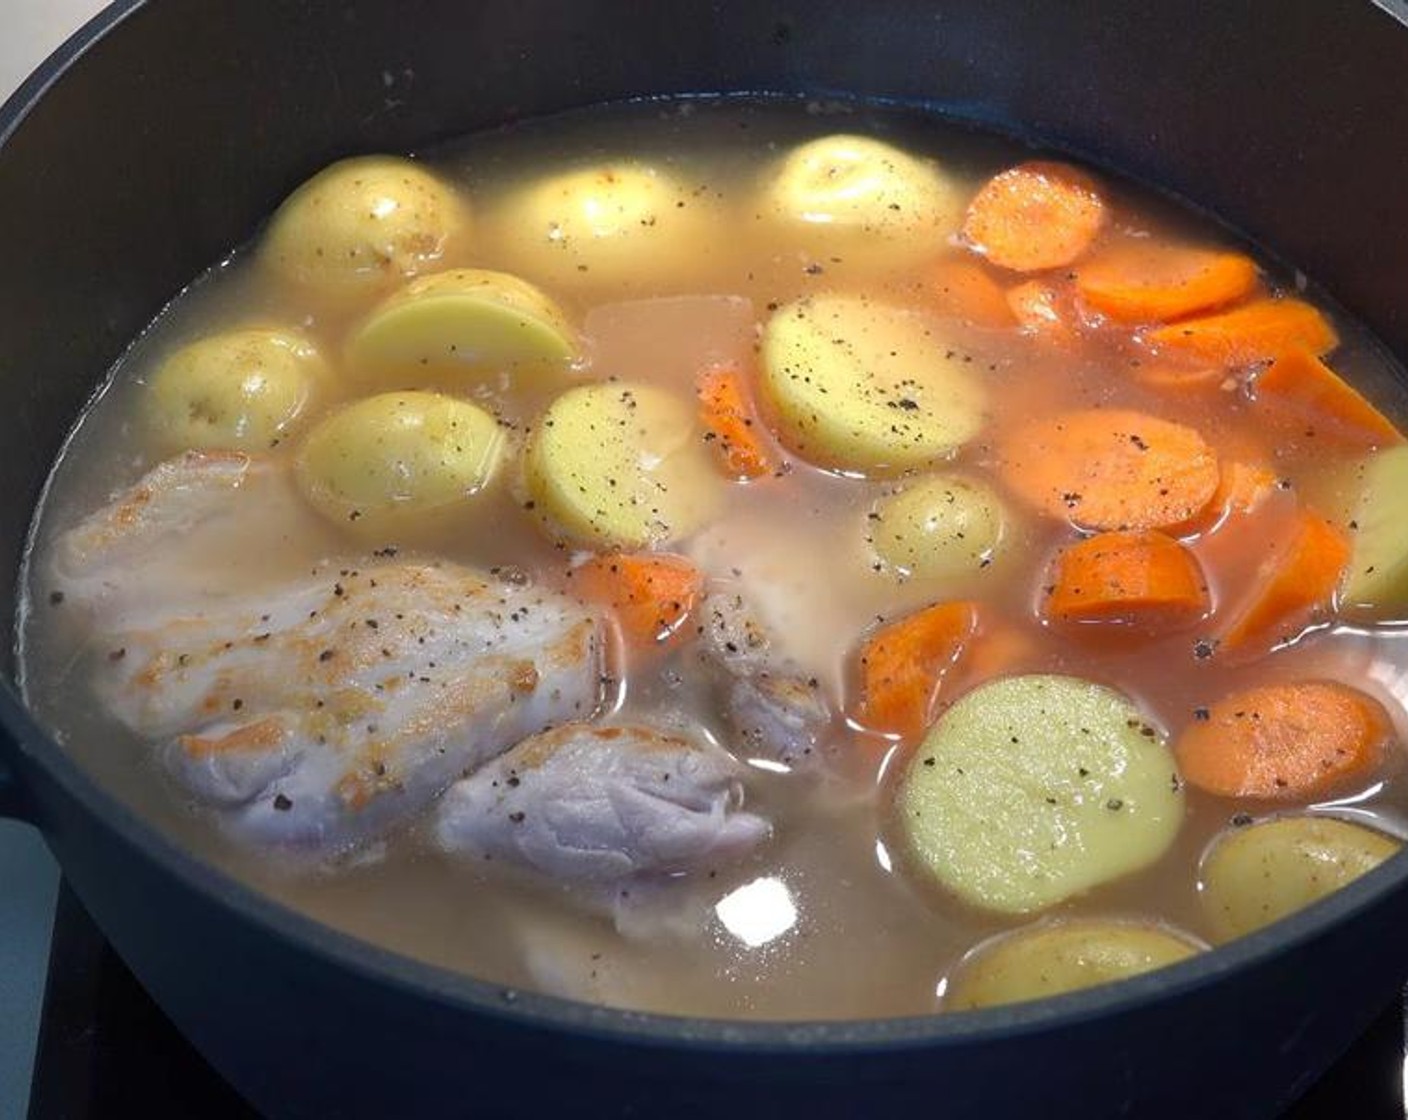 step 3 Add the chicken back to the pot, along with the Carrots (3), Baby Potatoes (8), and Chicken Stock (4 cups). Season with Freshly Ground Black Pepper (to taste).